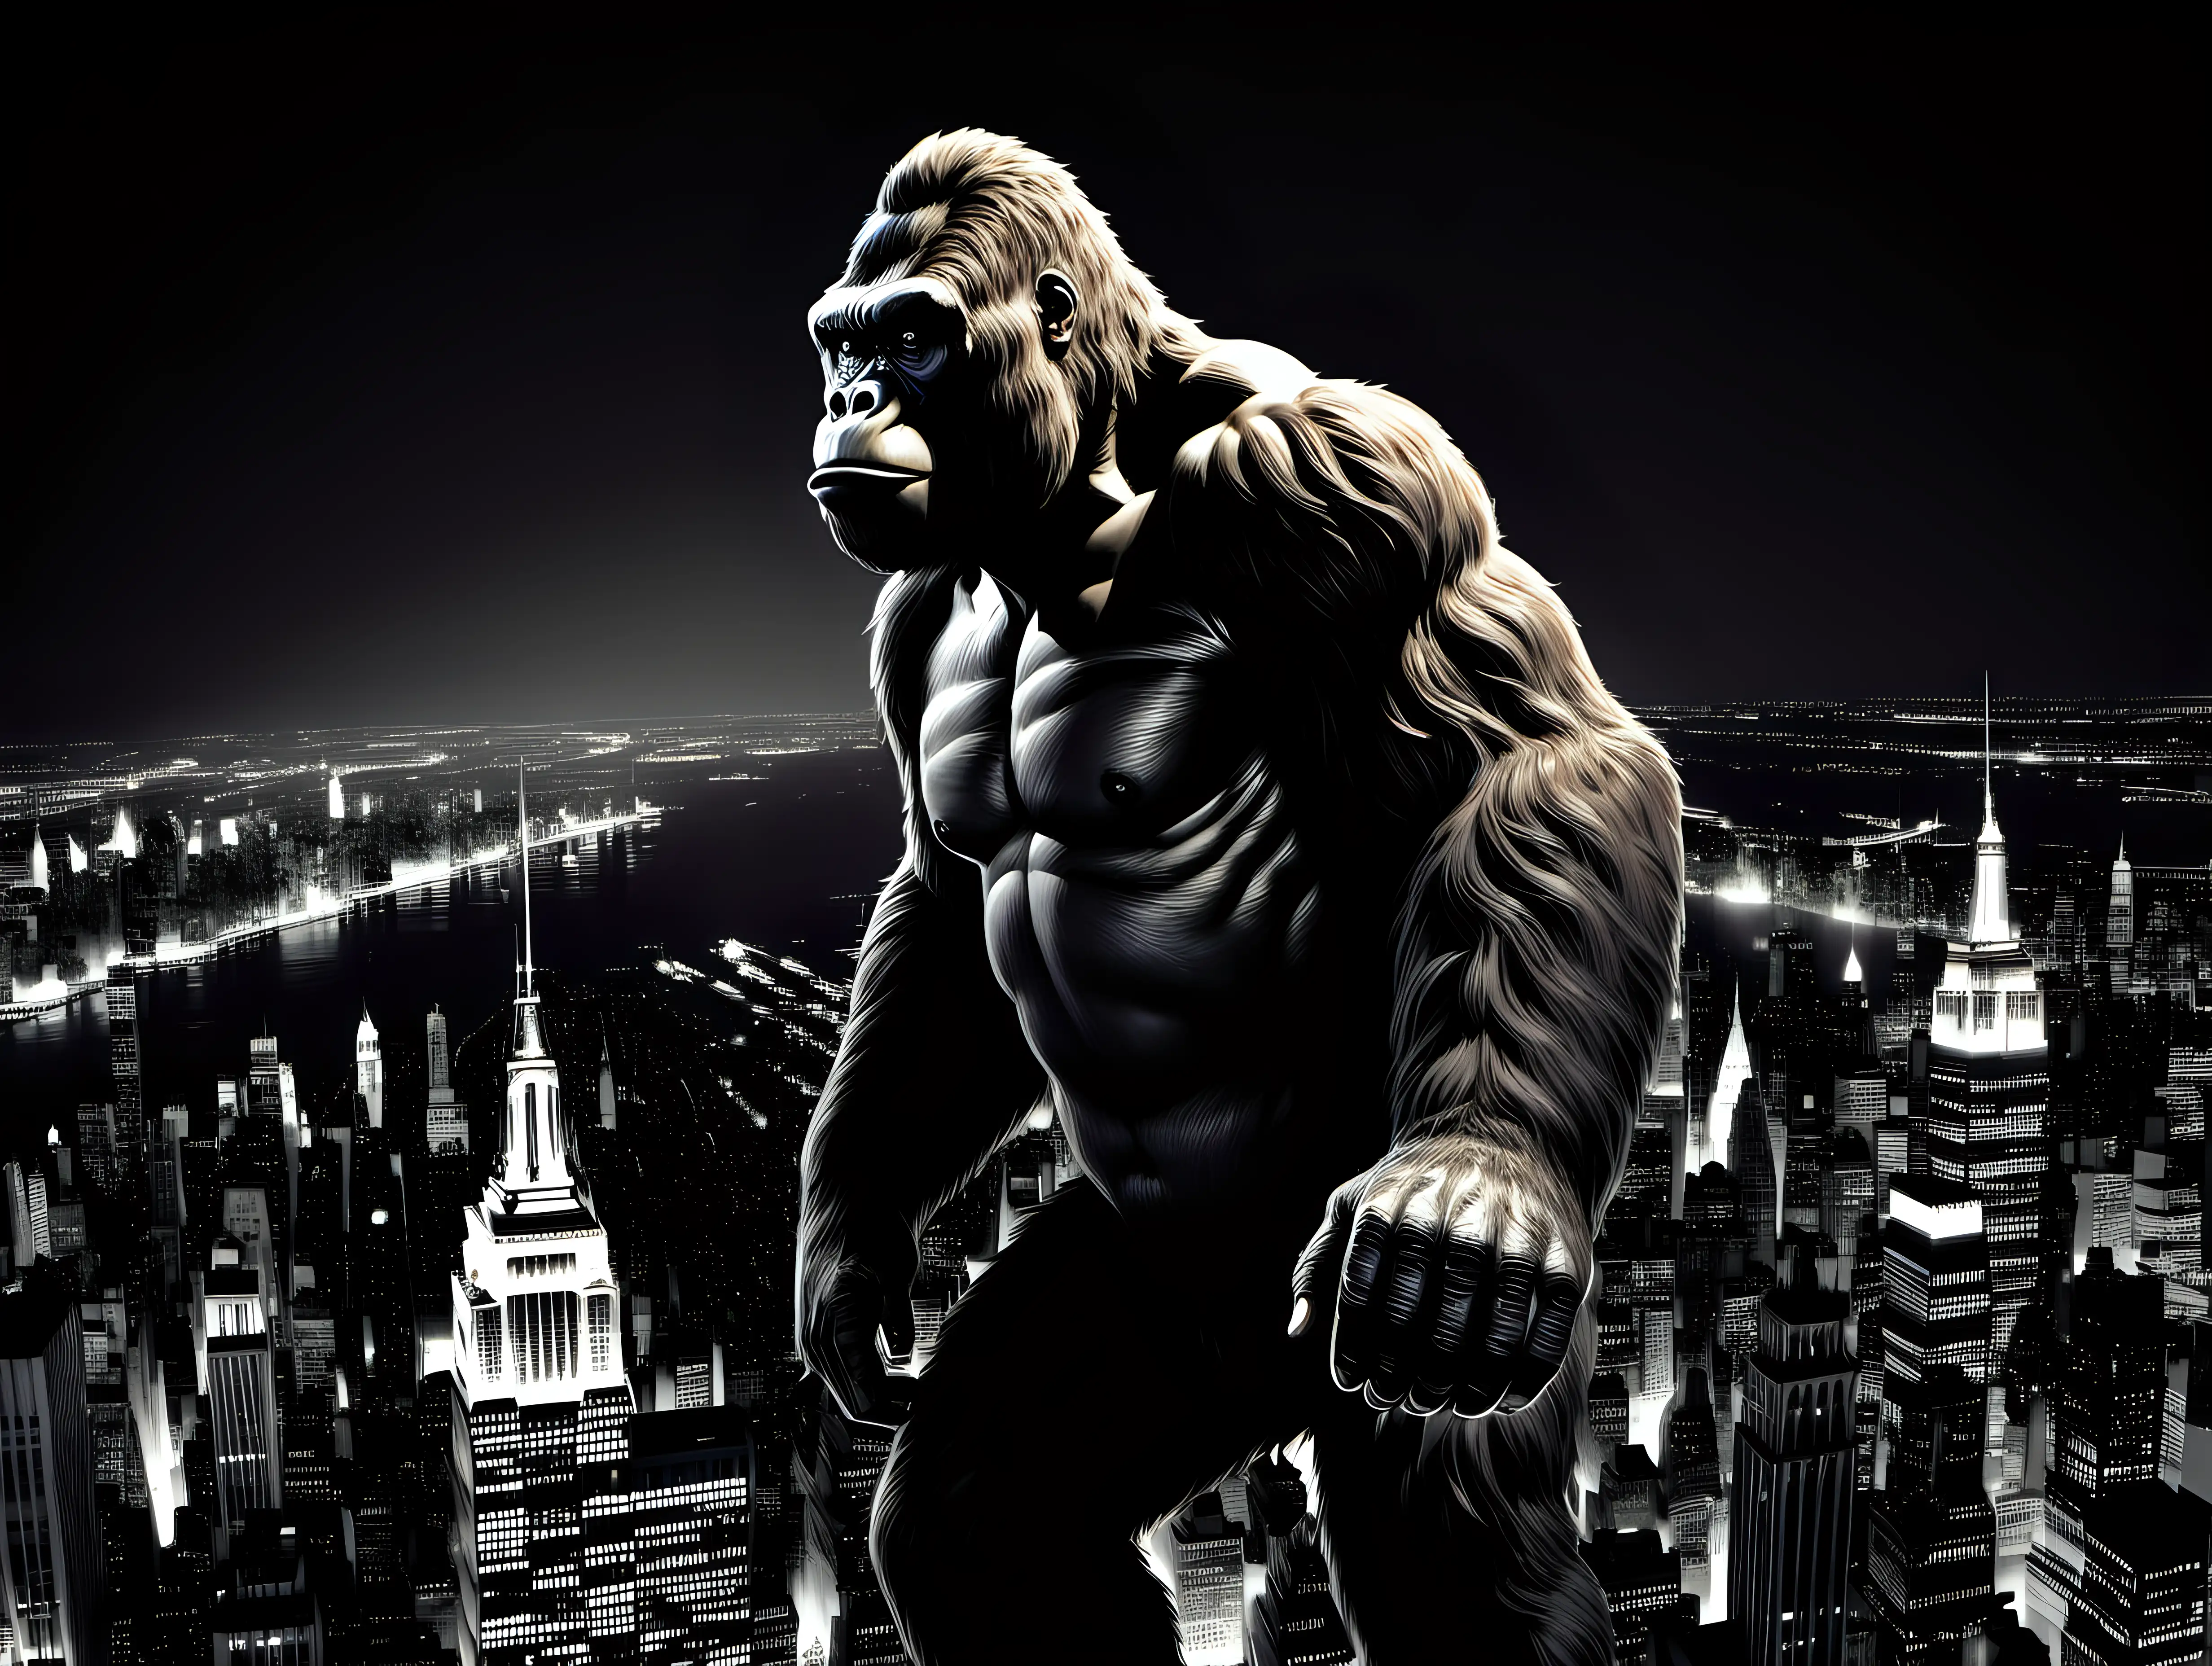 Majestic King Kong Ascending the Illuminated Empire State Building